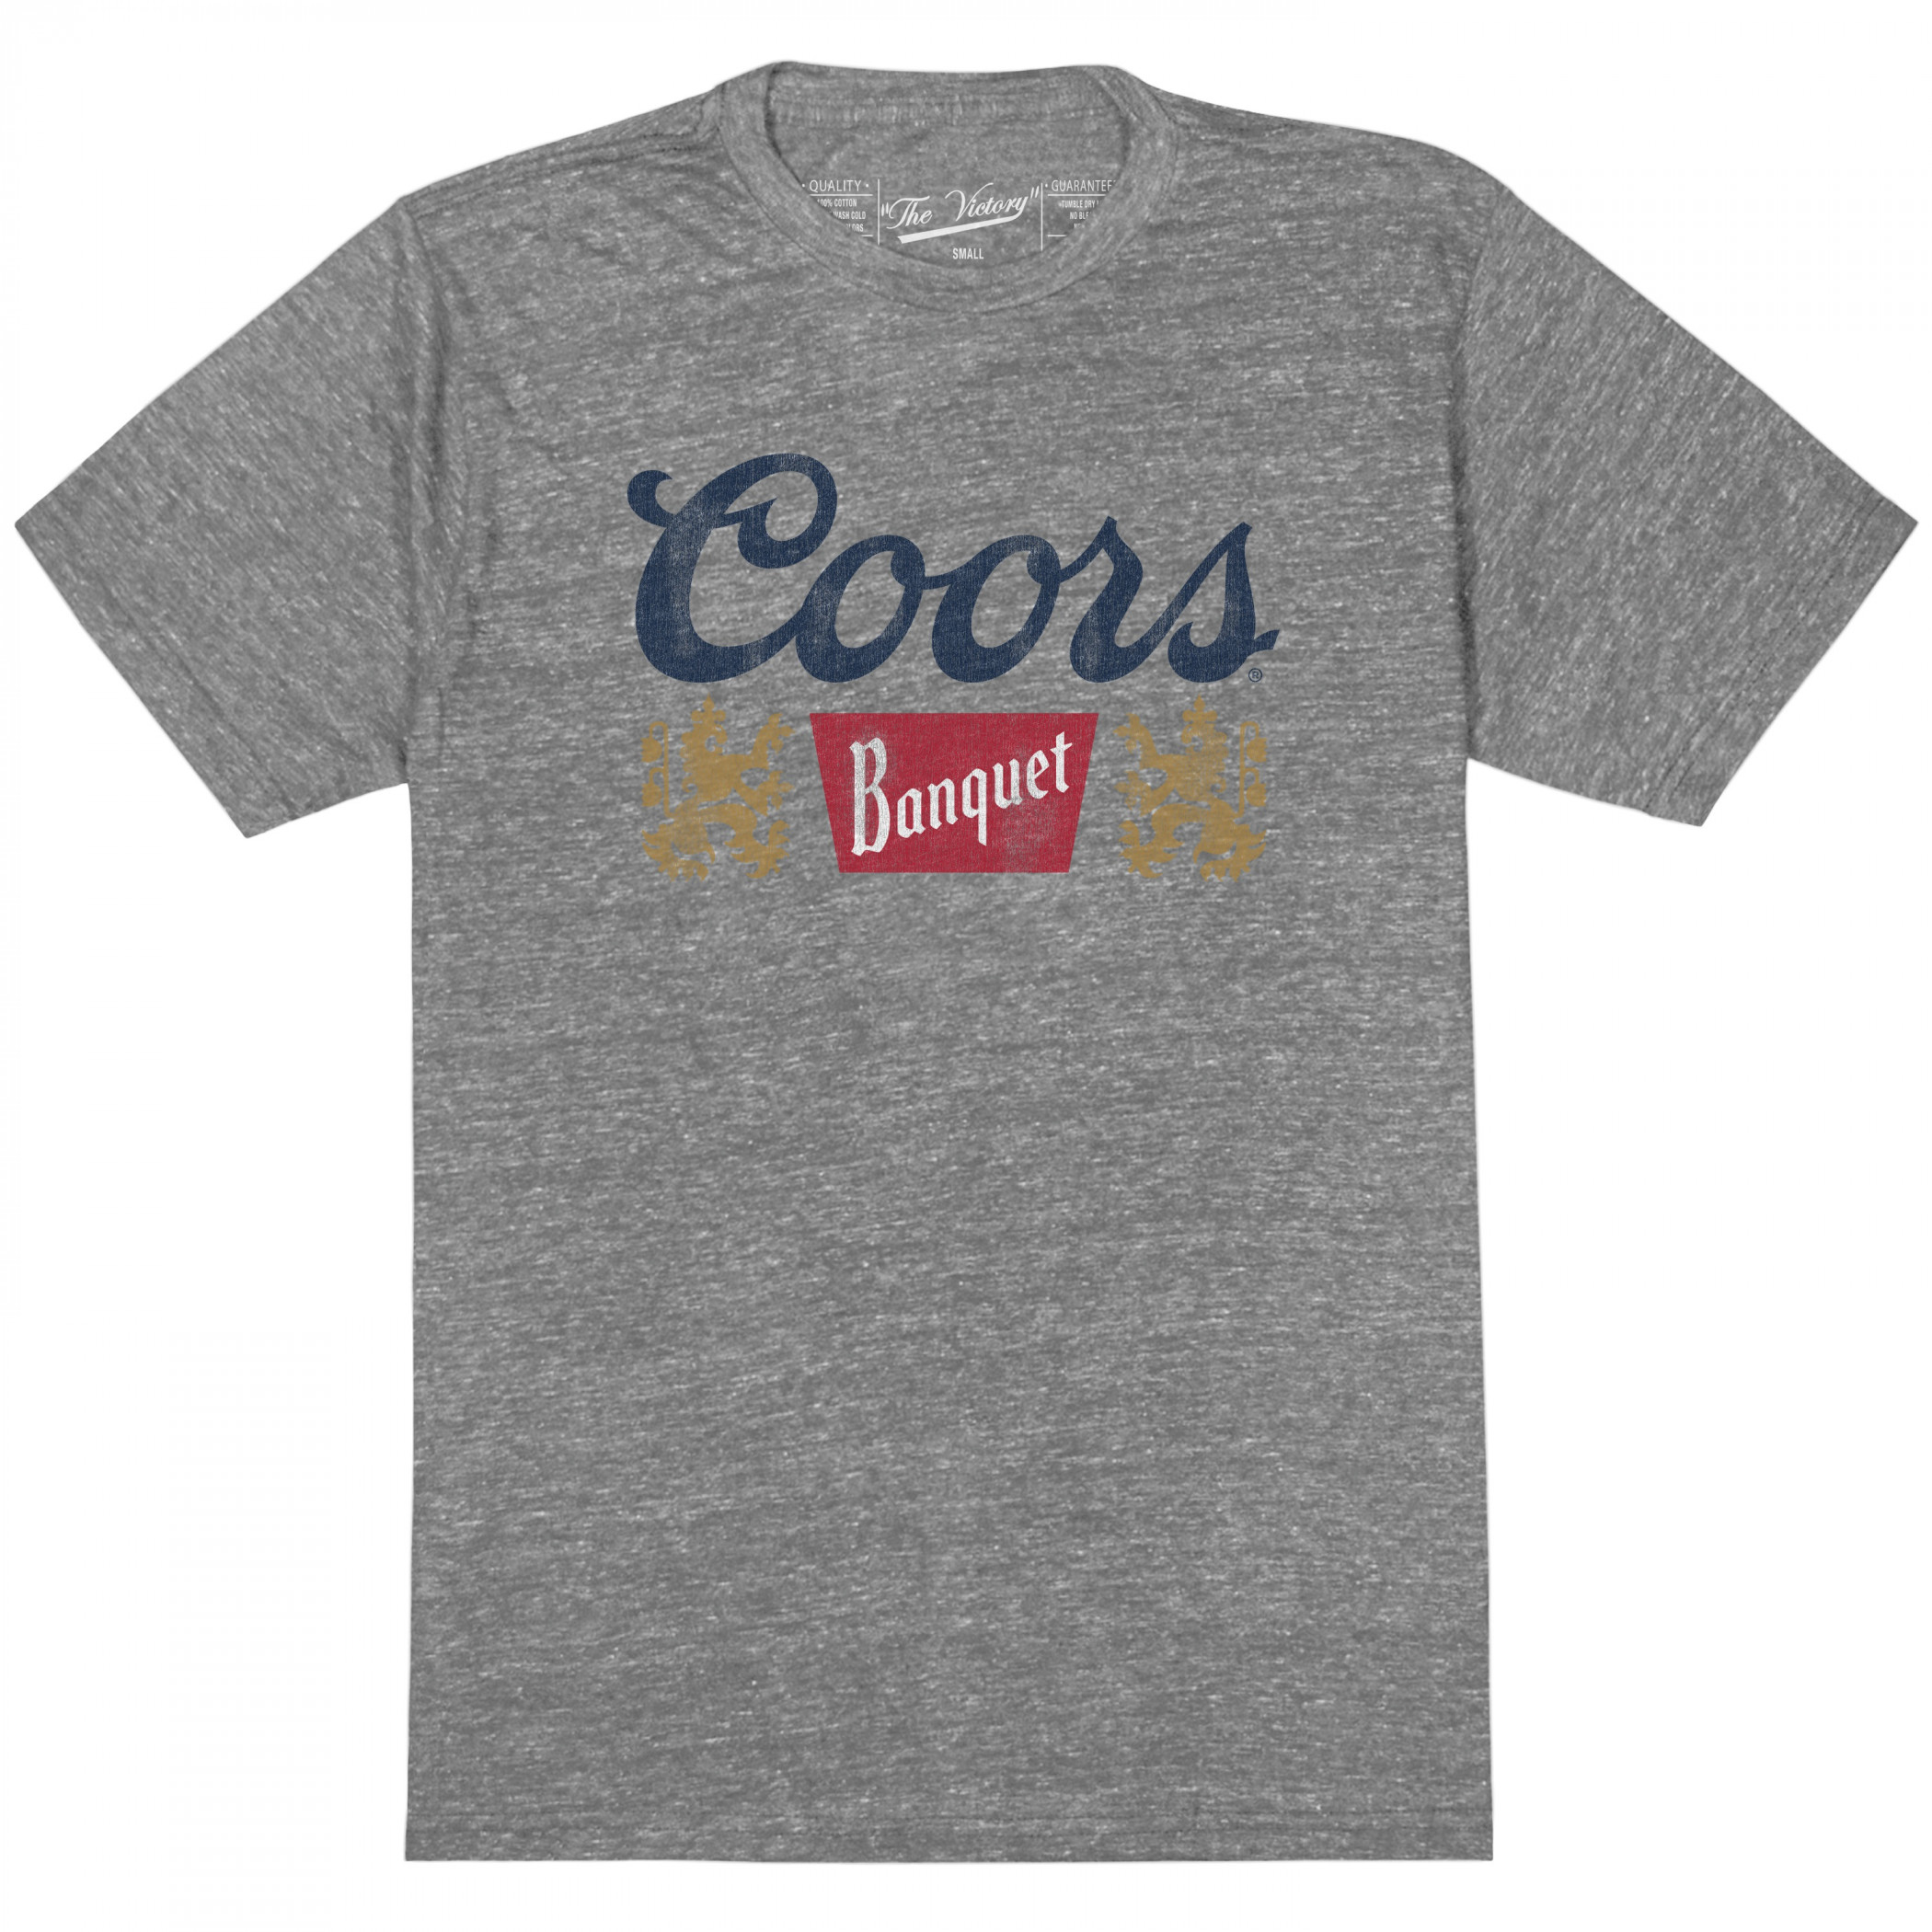 Coors Banquet Beer Classic Throwback Style T-Shirt